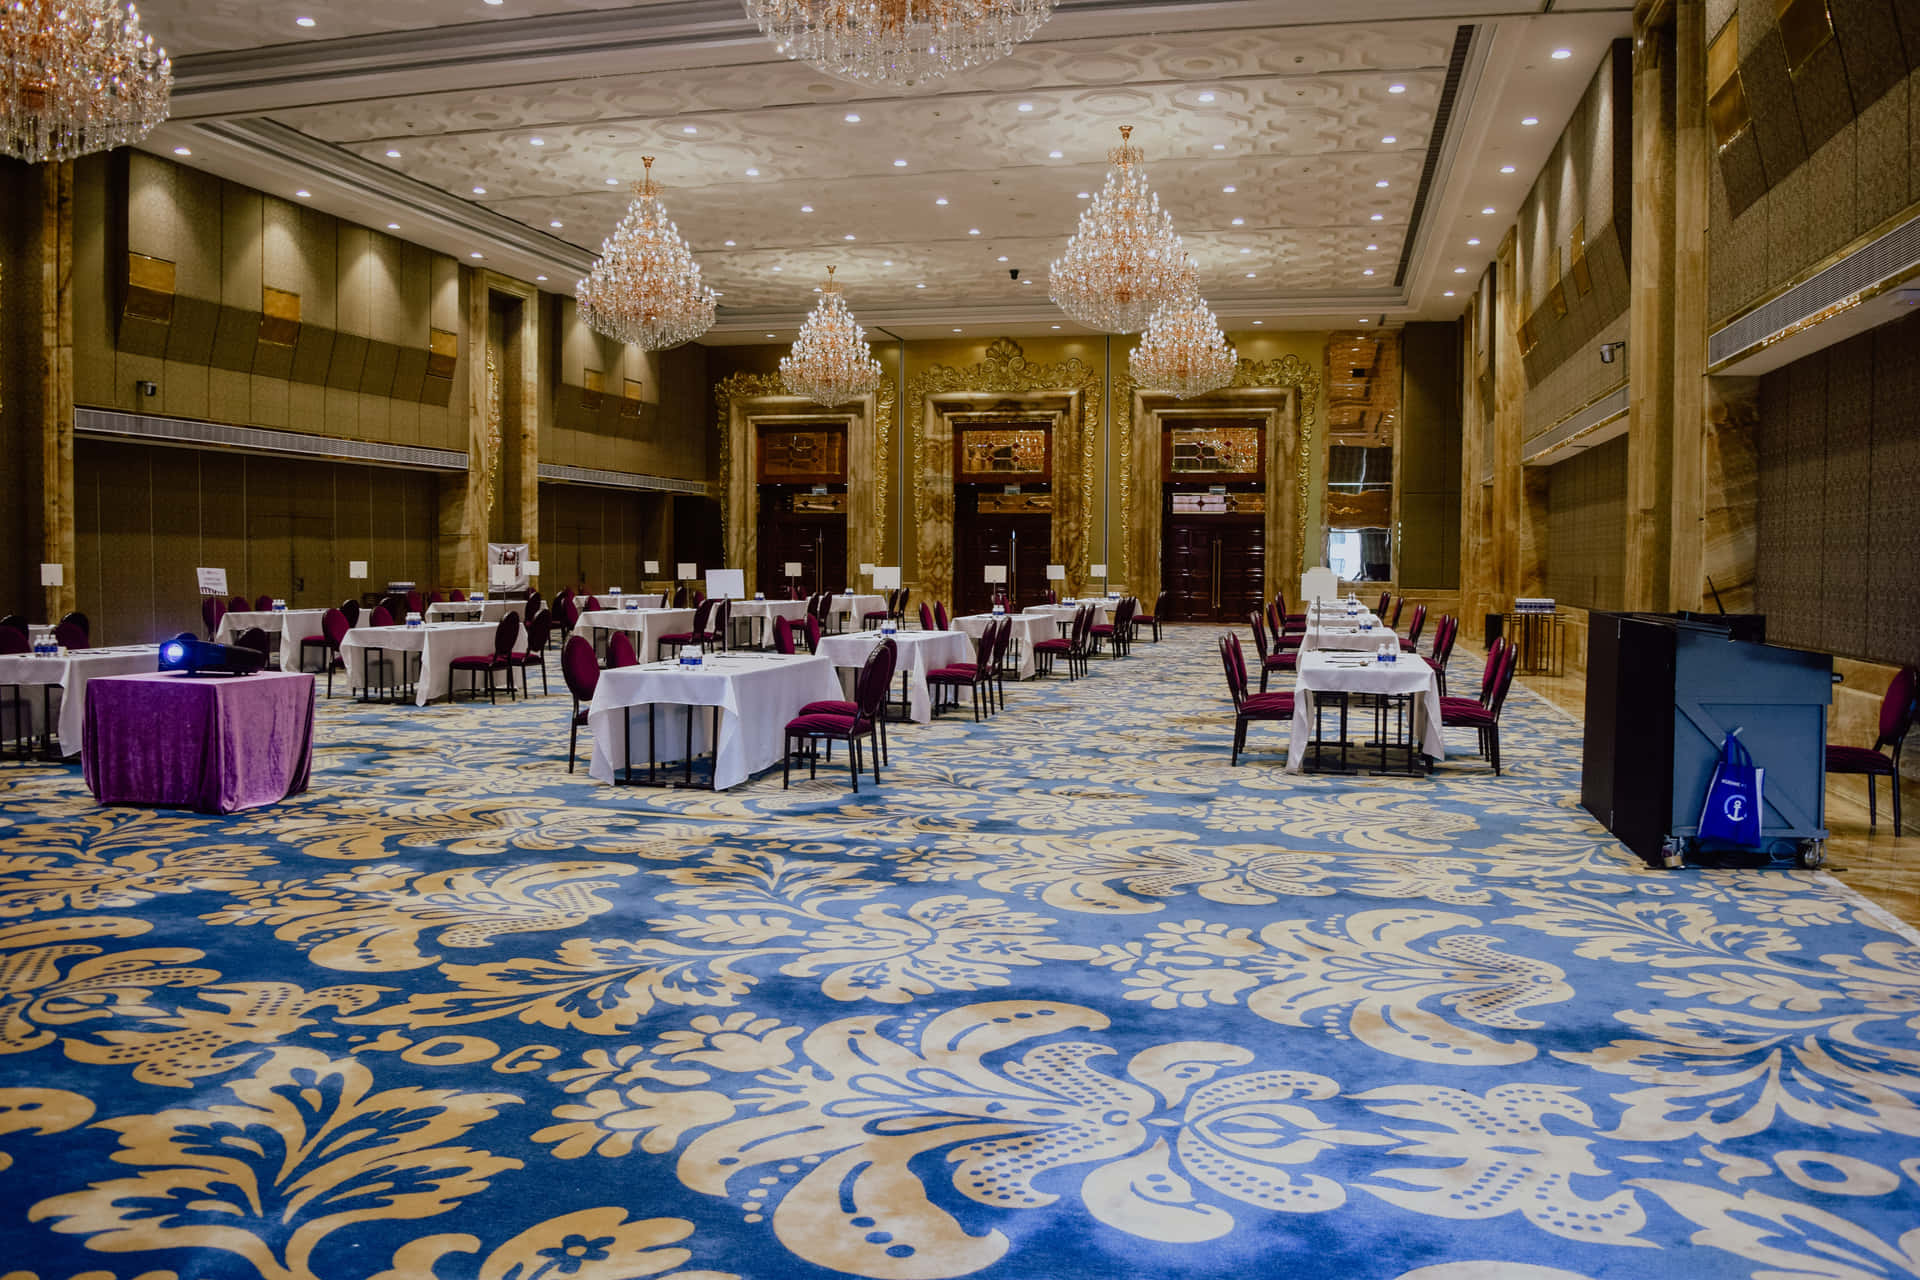 Enjoy a night of dancing and fun in this luxurious ballroom.